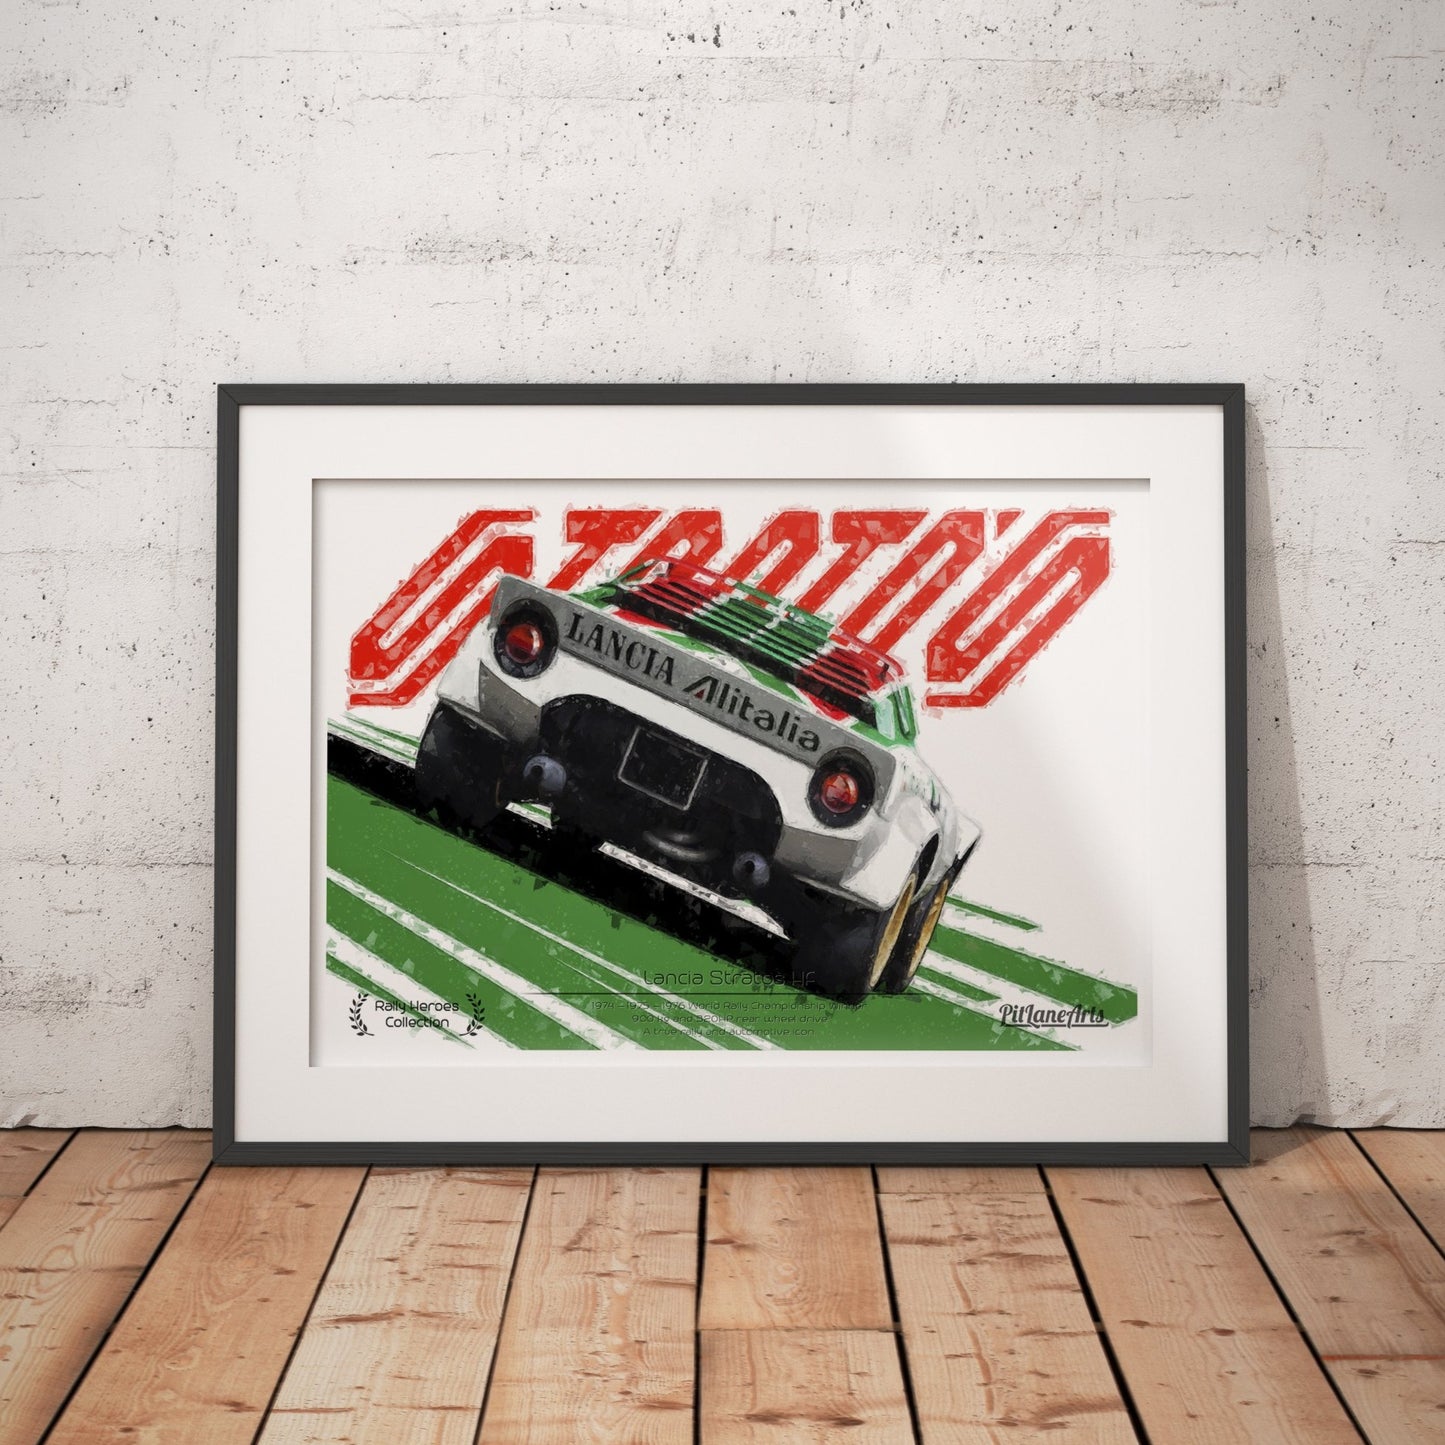 Framed Lancia Stratos Poster print on the floor - PitLaneArts